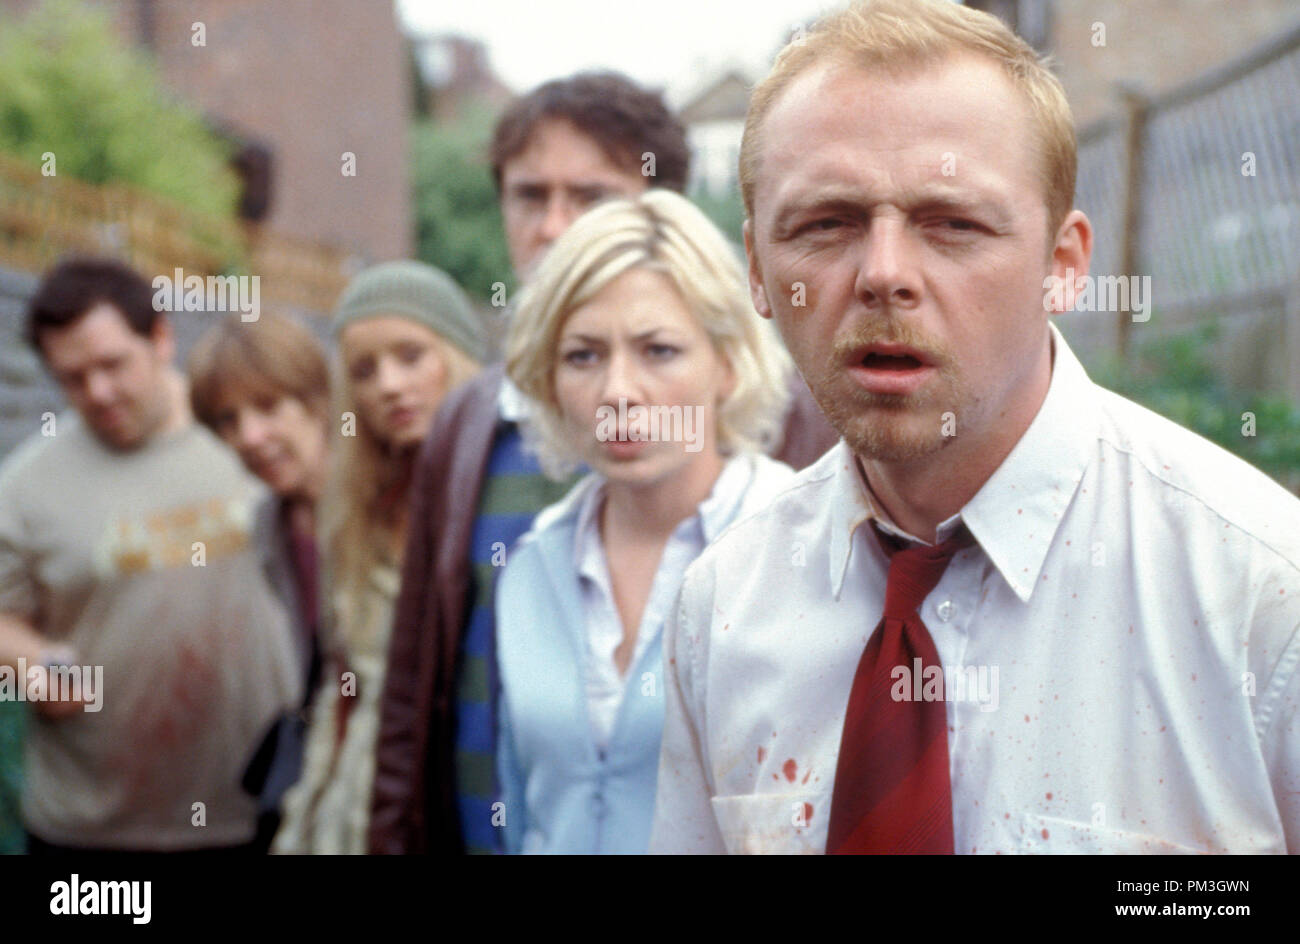 Film Still from 'Shaun Of The Dead' Nick Frost, Penelope Wilton, Lucy Davis,  Dylan Moran, Kate Ashfield, Simon Pegg © 2004 Rogue Features  File Reference # 30735675THA  For Editorial Use Only -  All Rights Reserved Stock Photo